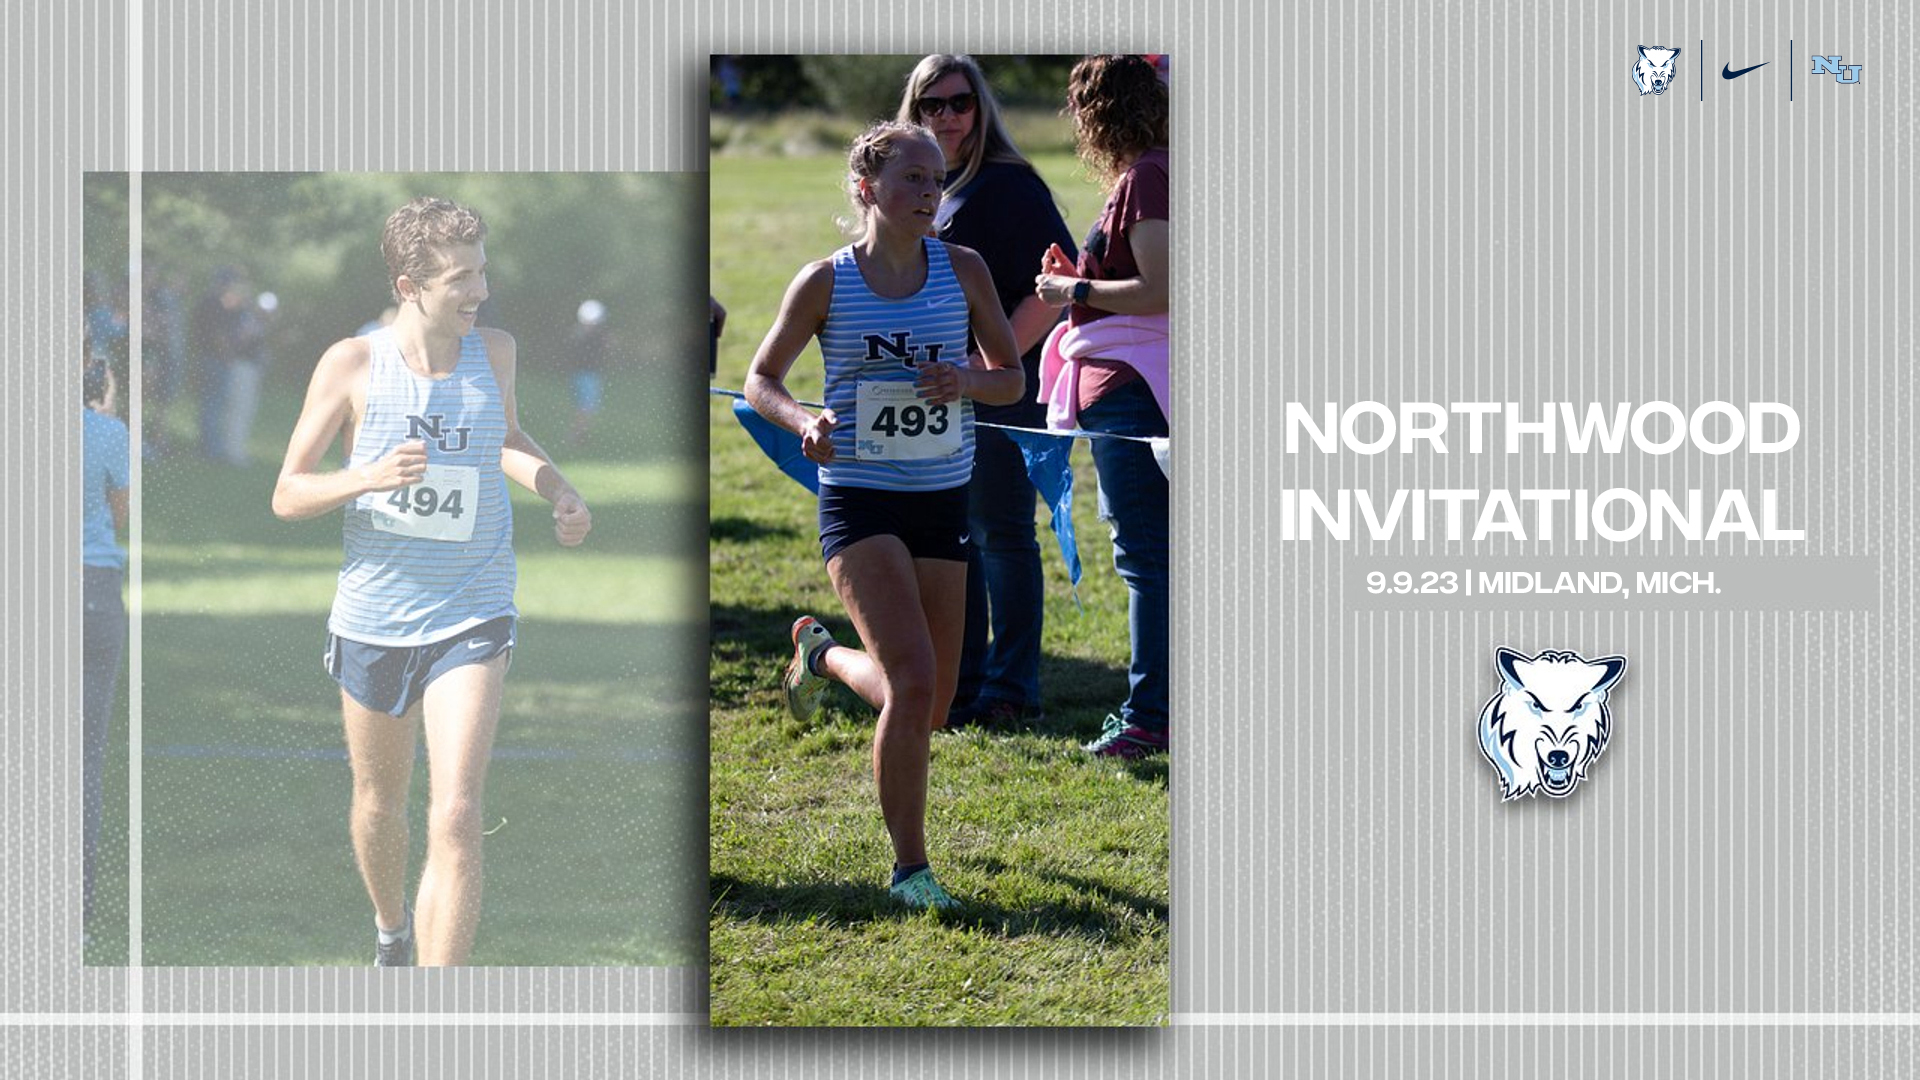 Cross Country Shows Out At Northwood Invitational